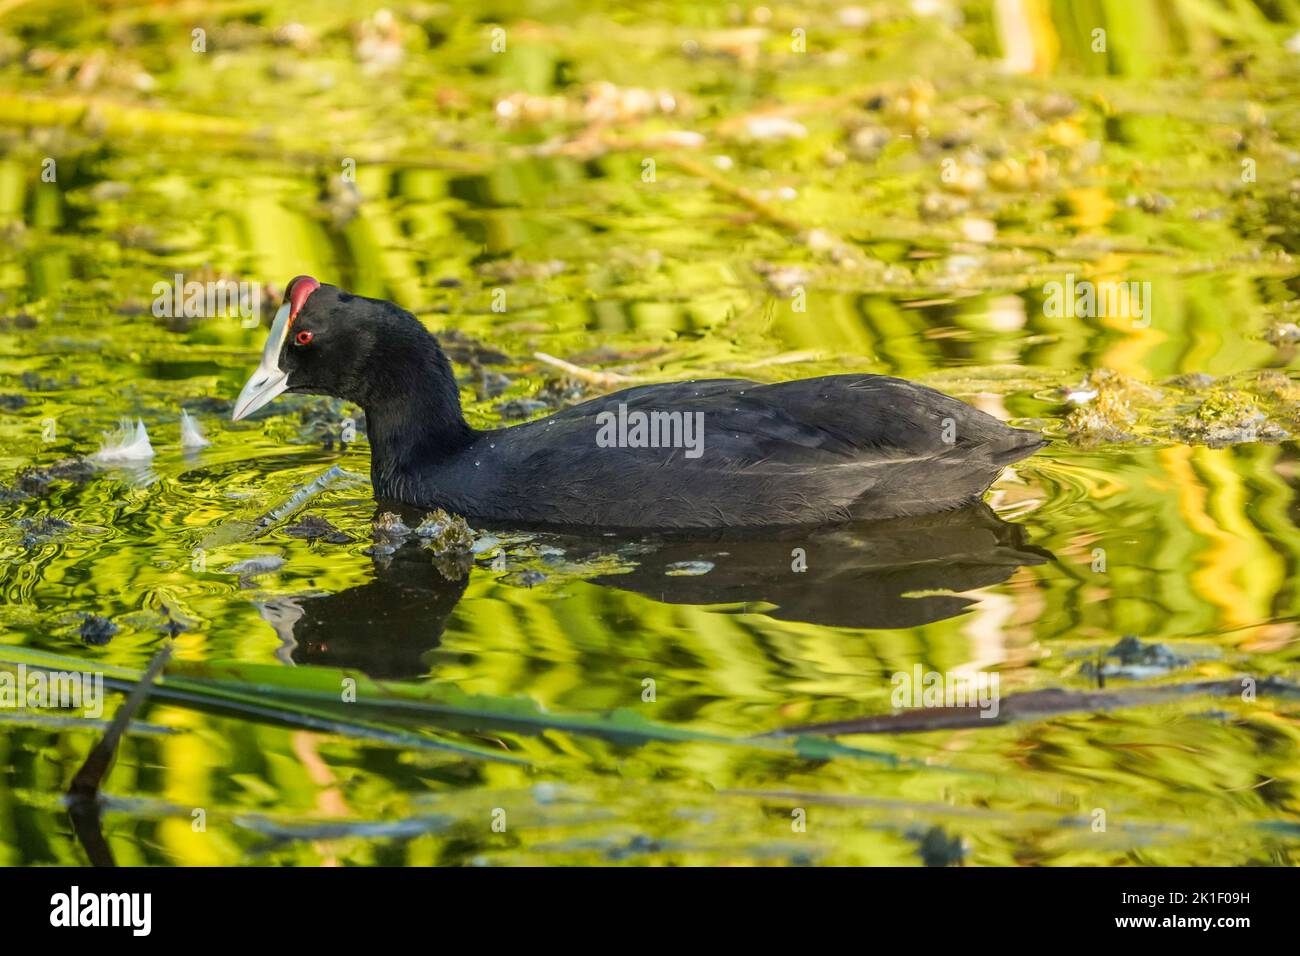 Coot rosso-knobbed, Coot crested, (Fulica cristata) lago d'acqua dolce, Andalucia, Spagna meridionale. Foto Stock